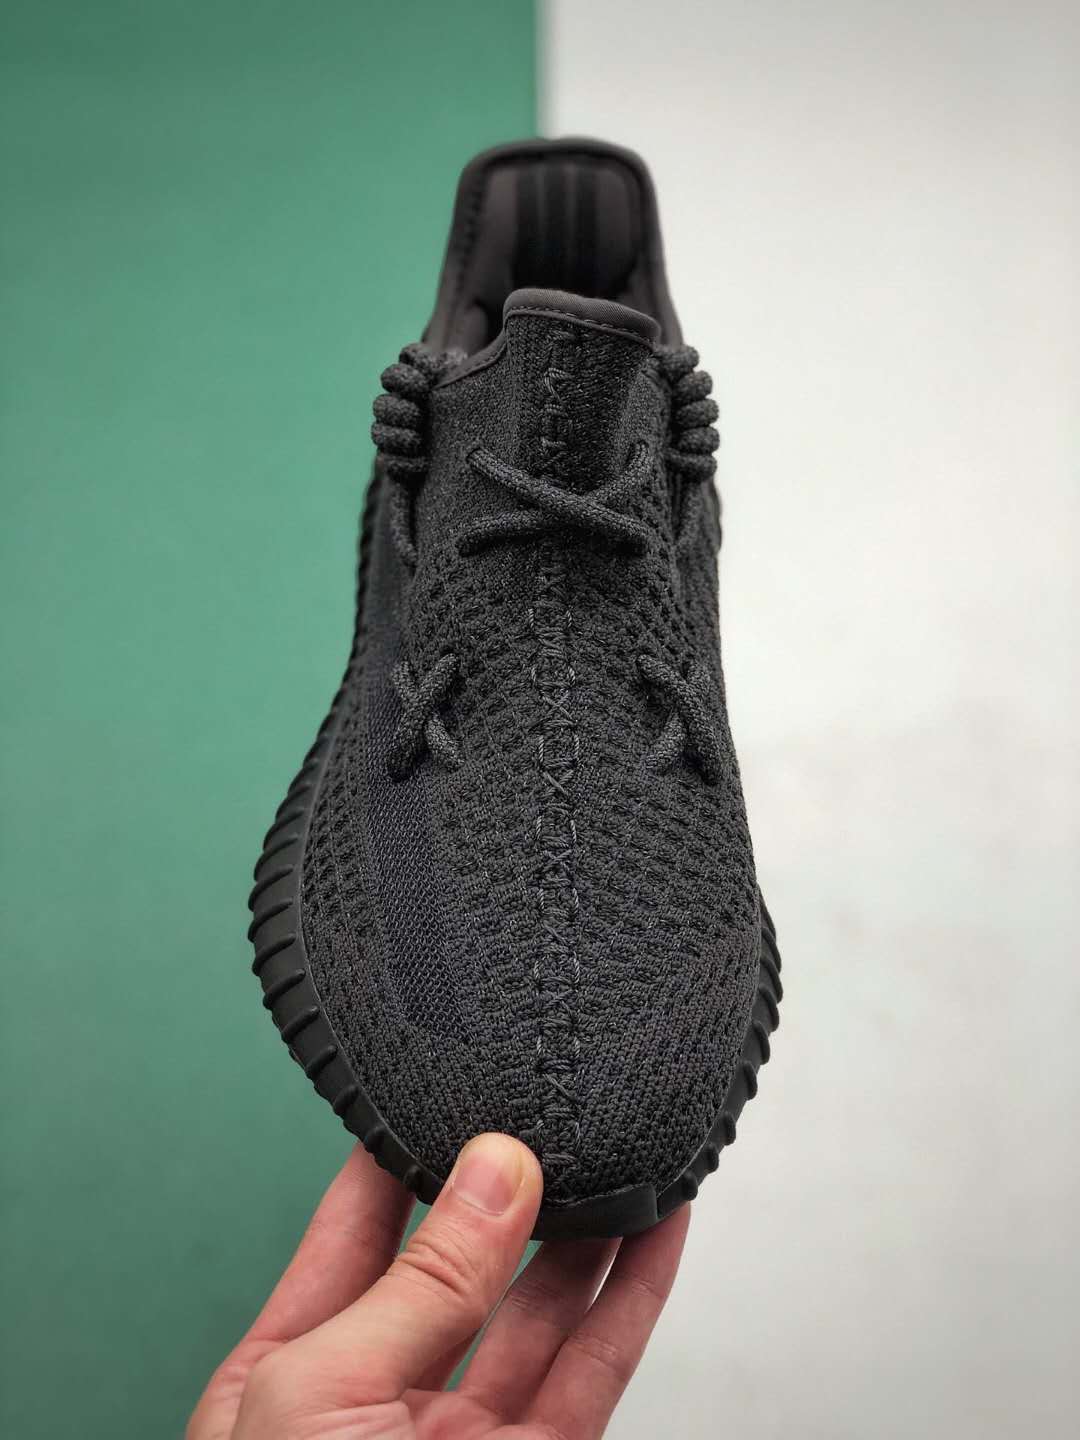 Adidas Yeezy Boost 350 V2 Black Non-Reflective FU9006 - Premium Sneakers for Ultimate Style and Comfort